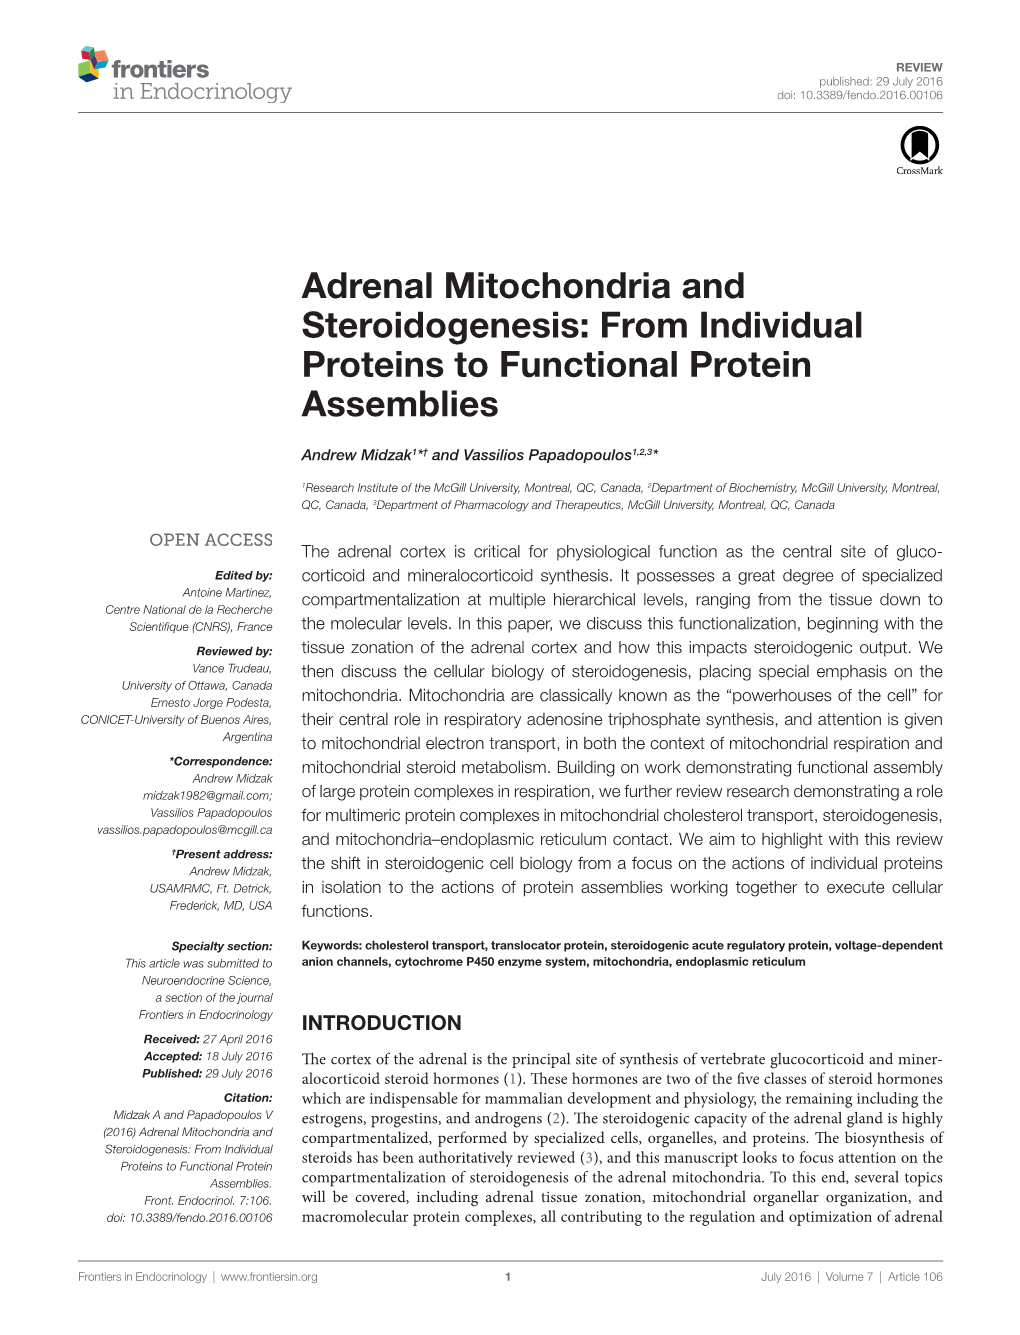 Adrenal Mitochondria and Steroidogenesis: from Individual Proteins to Functional Protein Assemblies